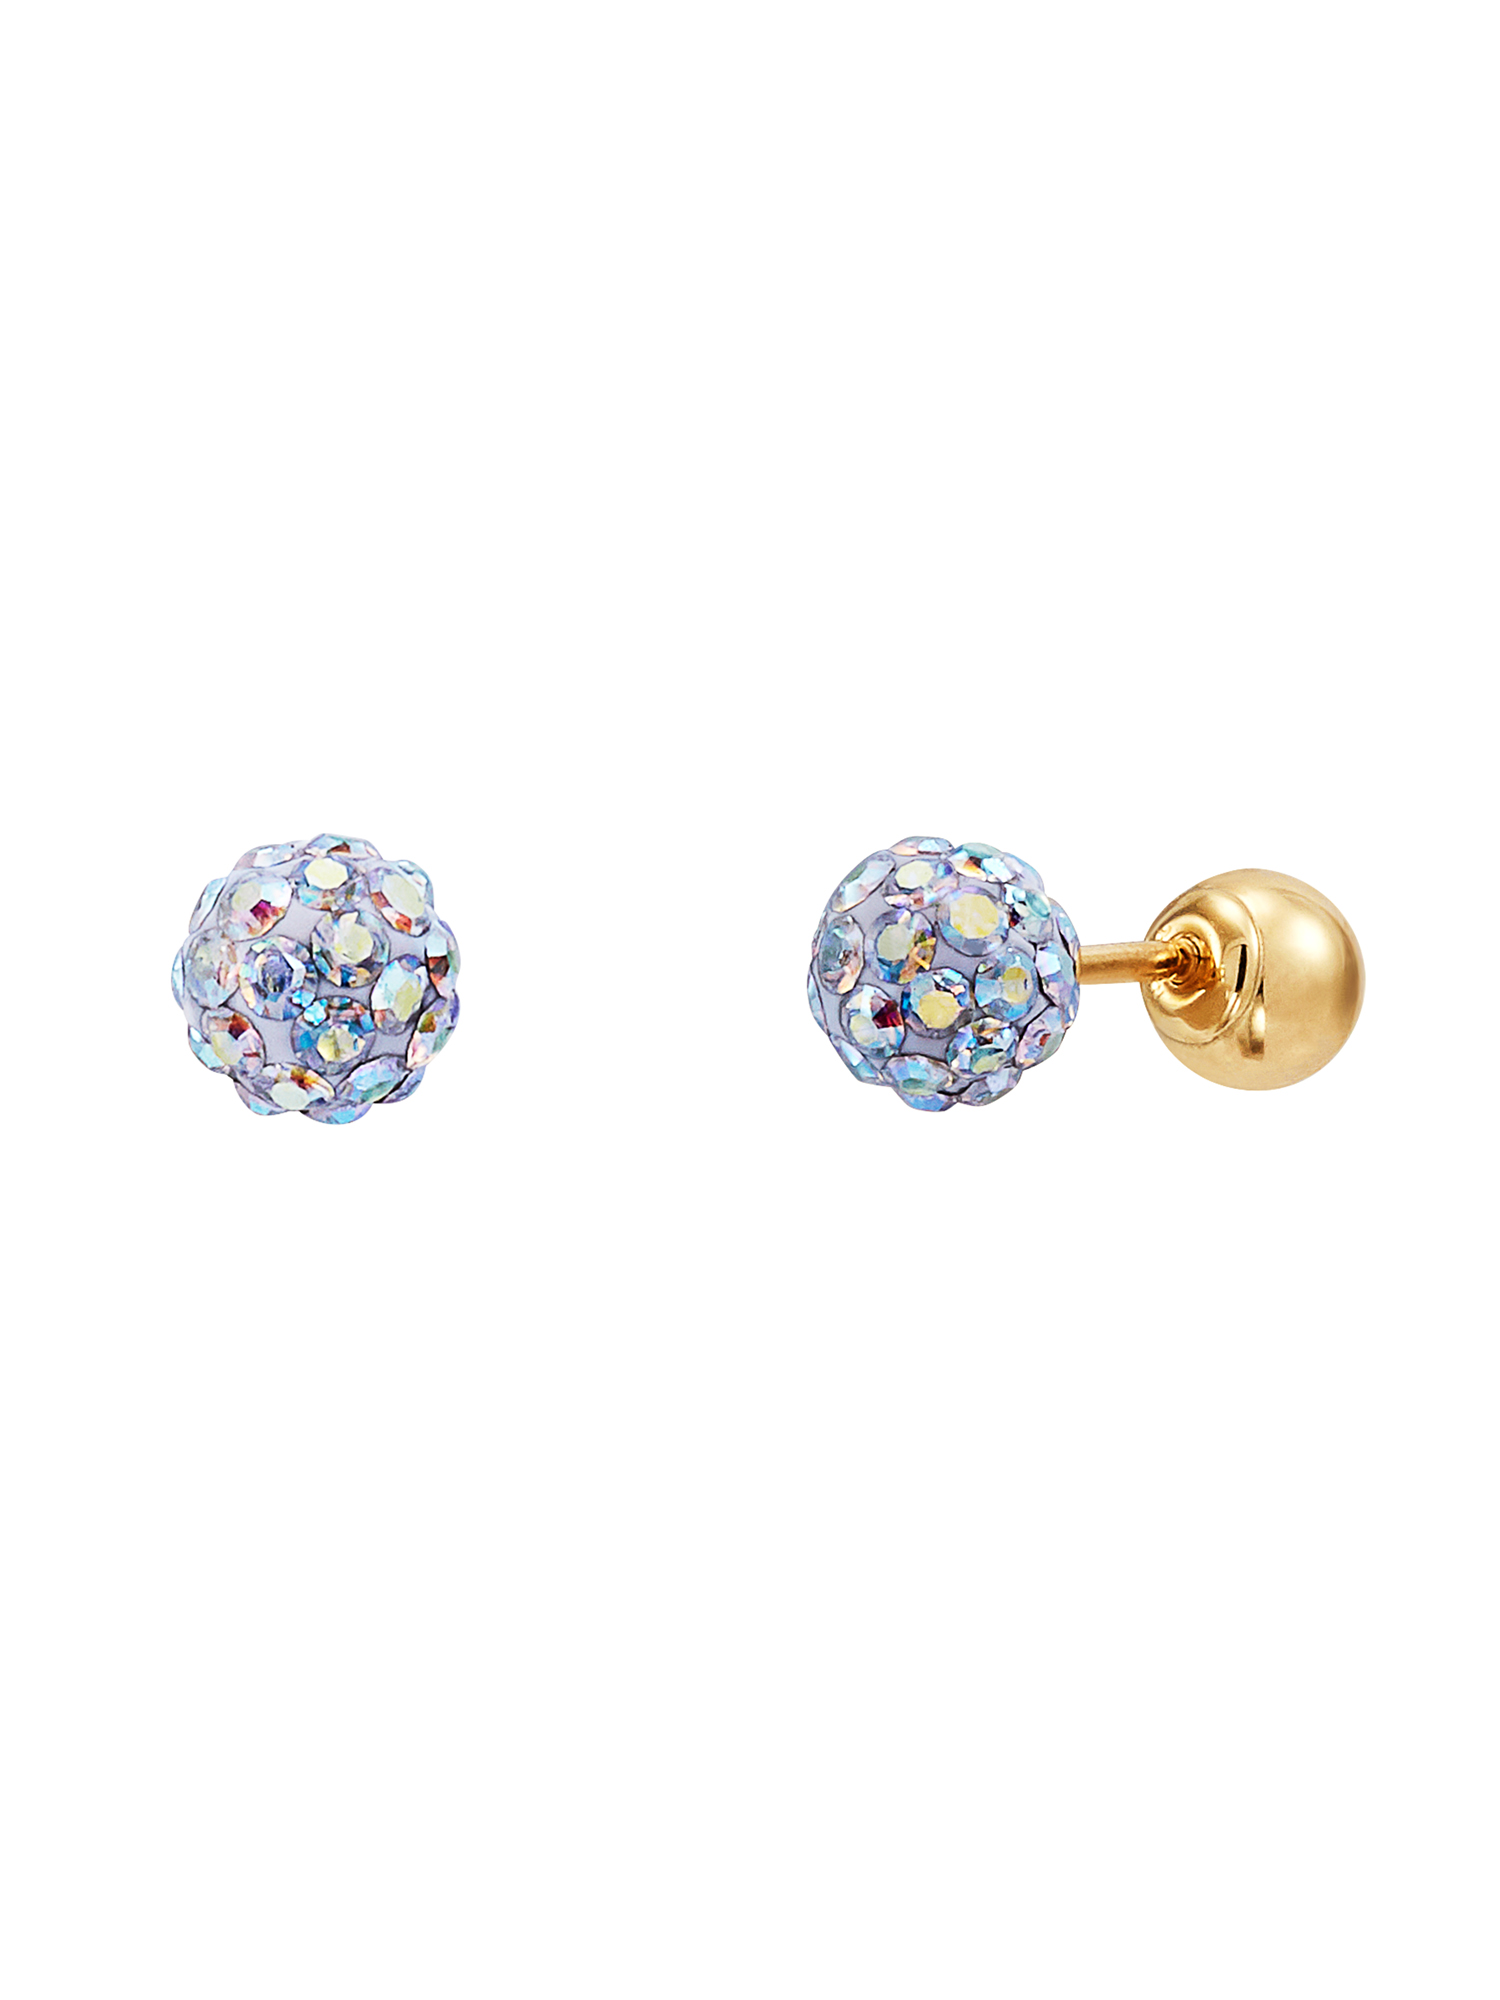 Brilliance Fine Jewelry Girls Aurora Borealis Crystals 4.8MM Ball Studs in 10K Yellow Gold - image 1 of 4